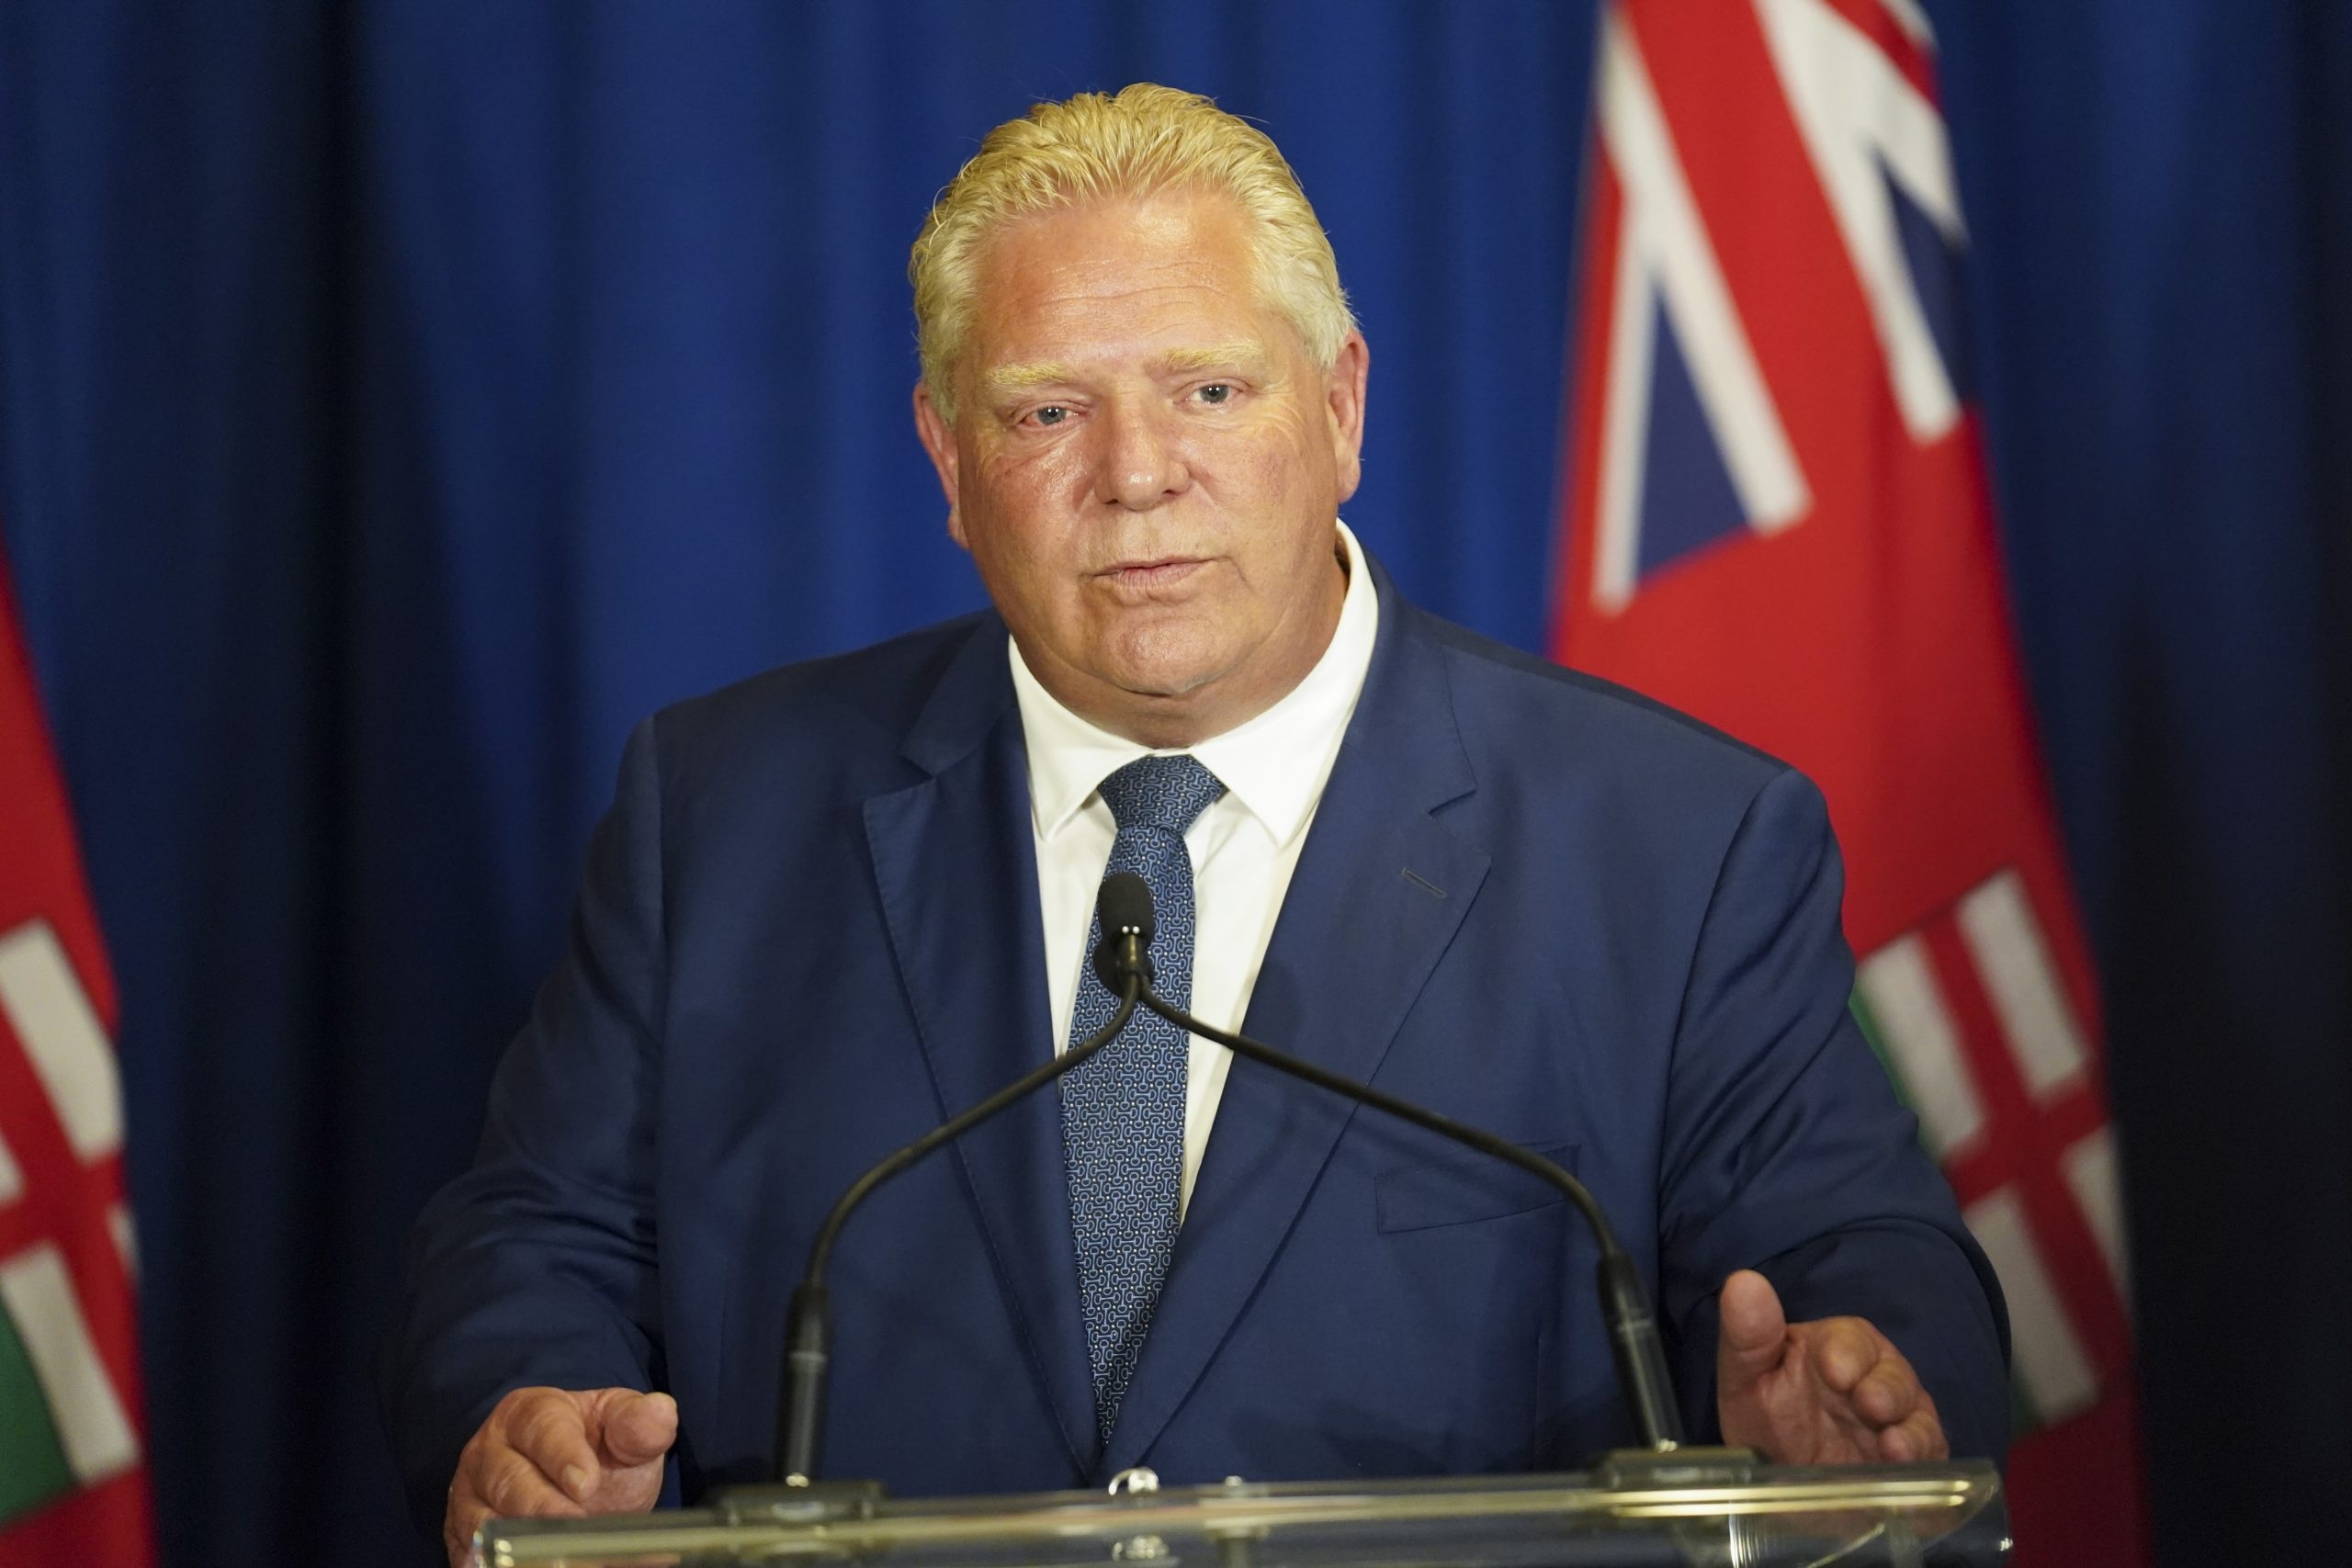 LILLEY: Ignore Ford's critics who oppose every effort to build homes